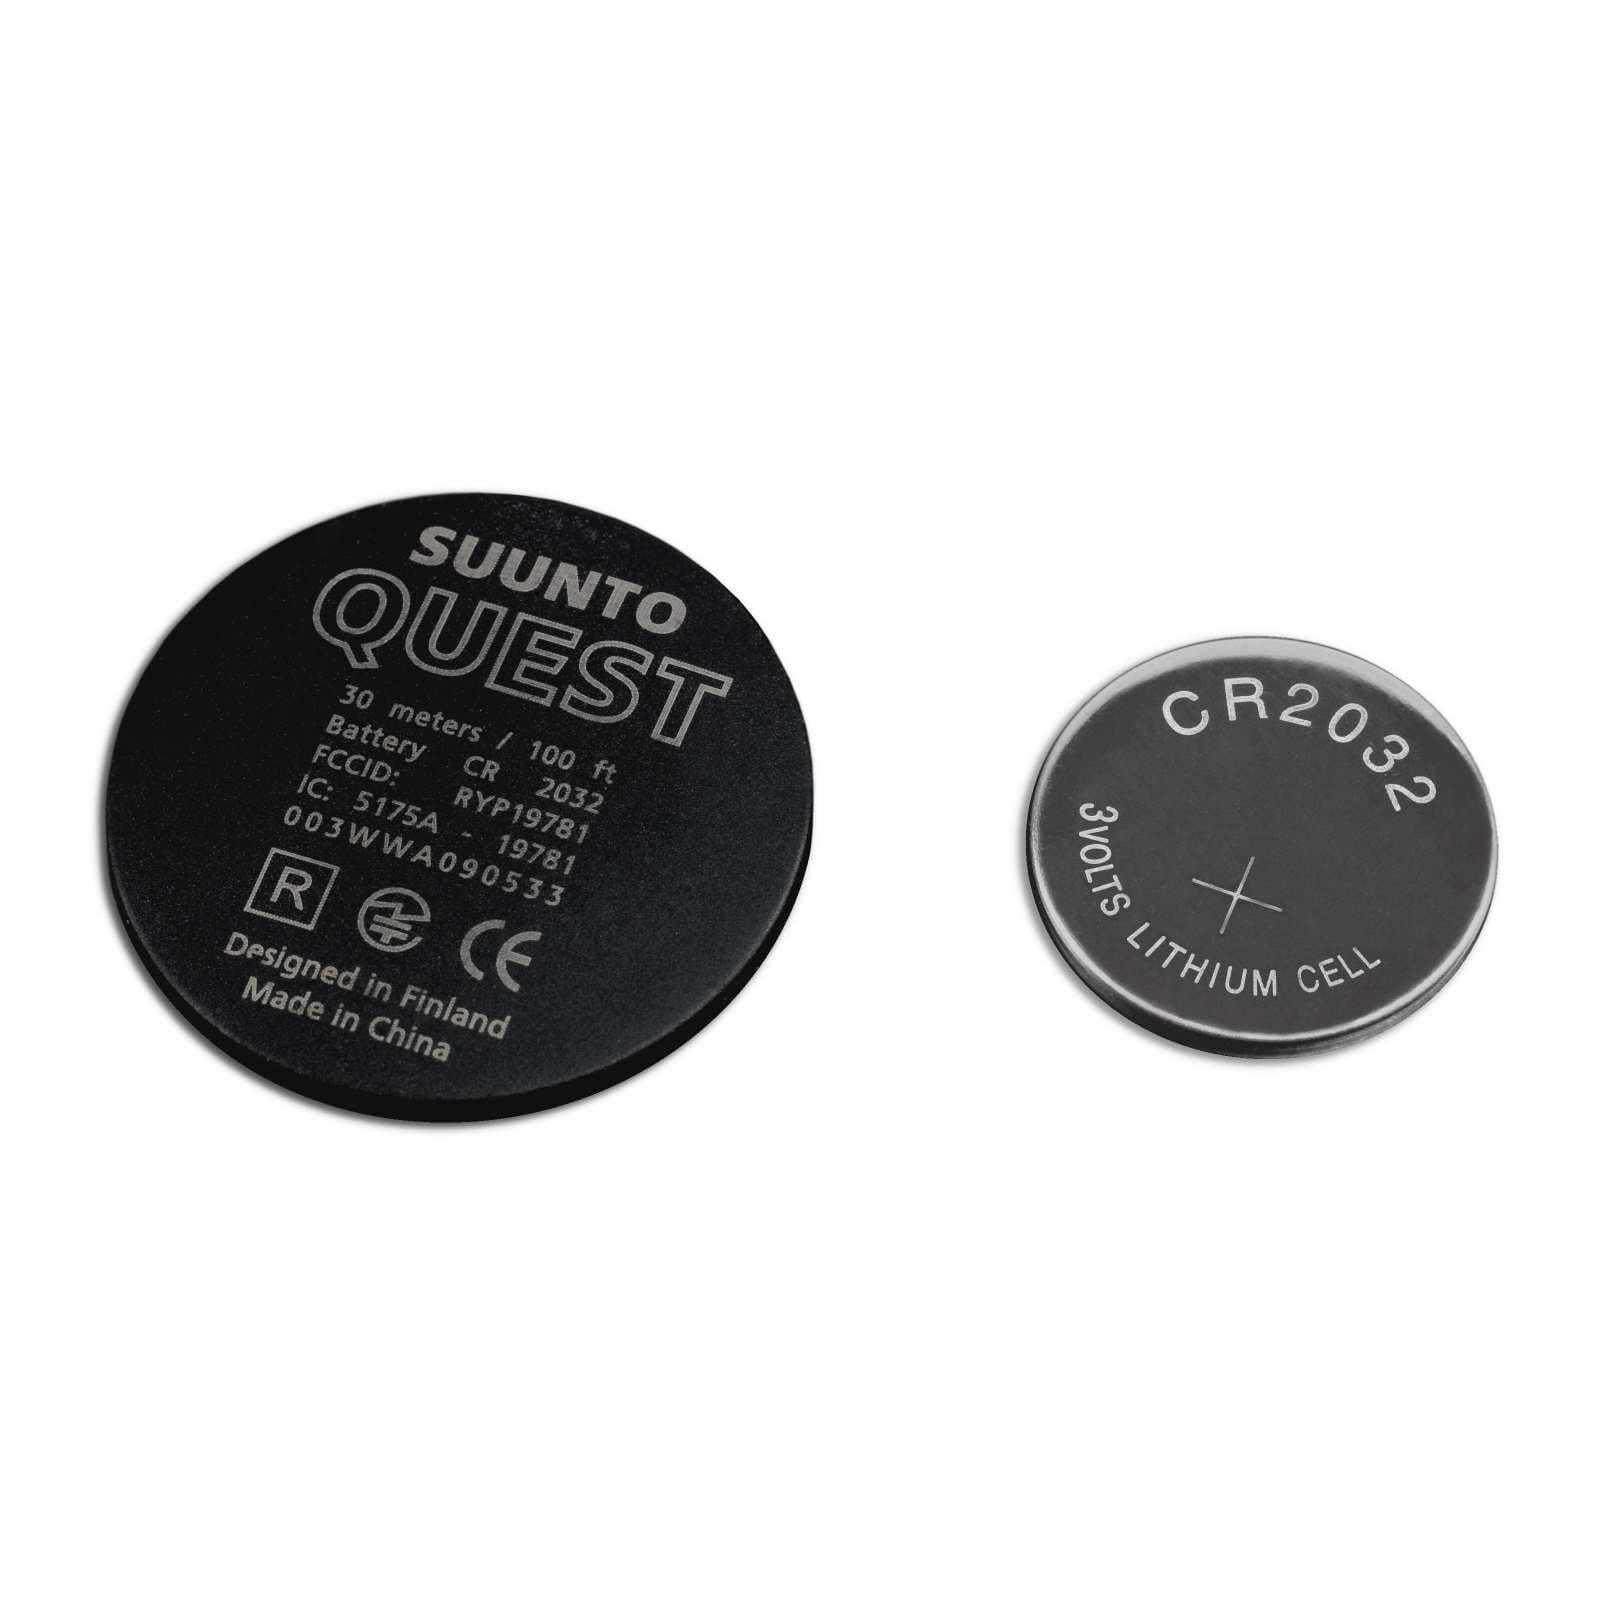 Buy Suunto Quest Battery Repleacement from Outnorth